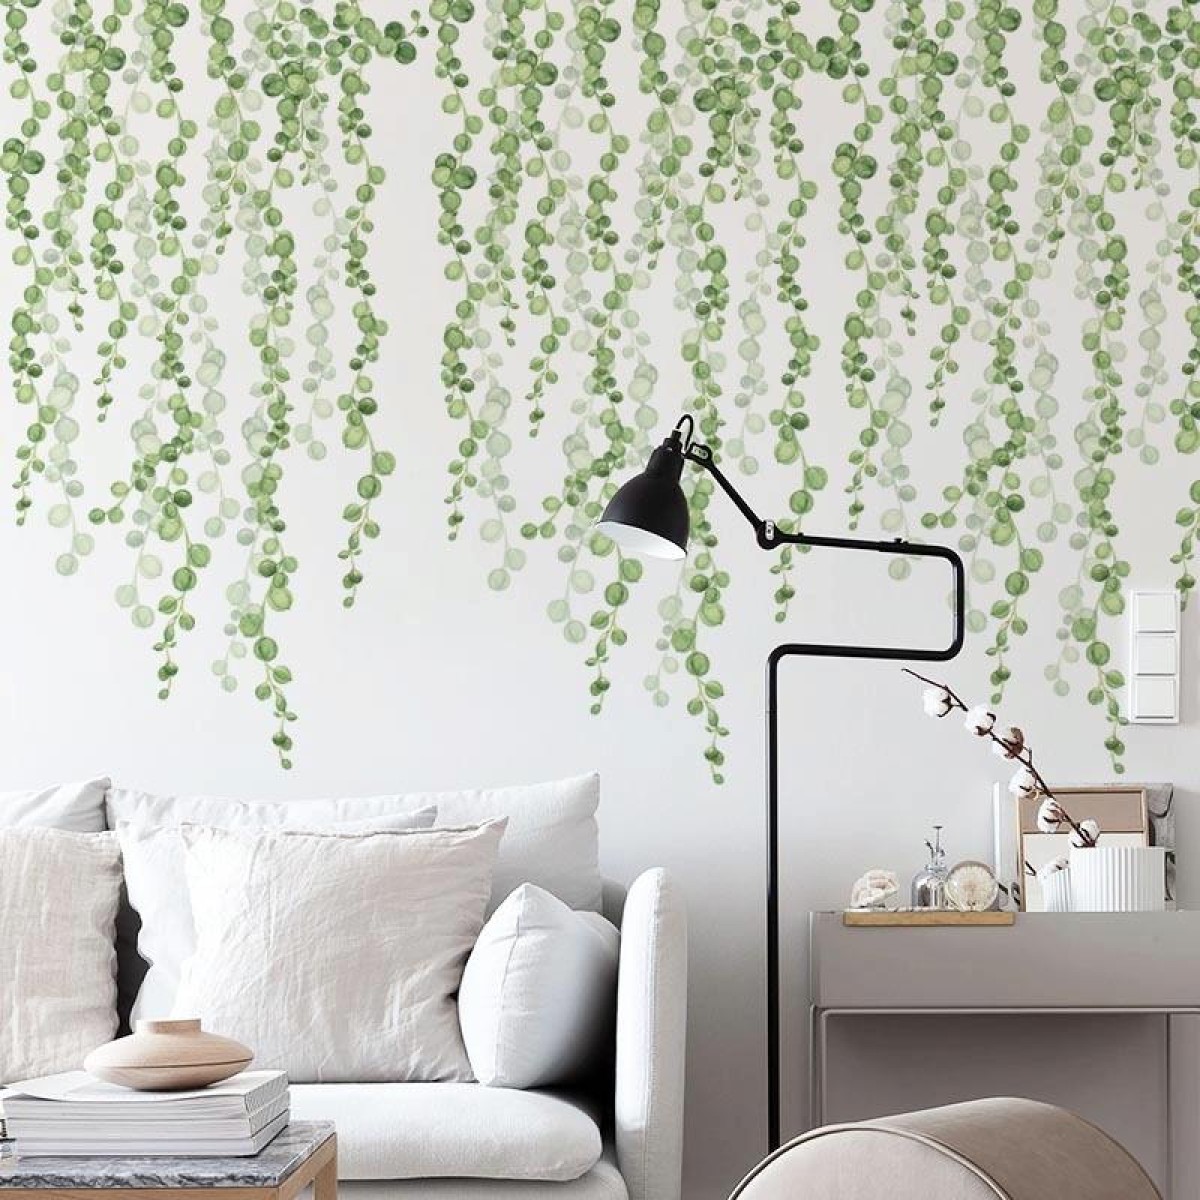 Green Leaf Self-adhesive Removable Wall Stickers